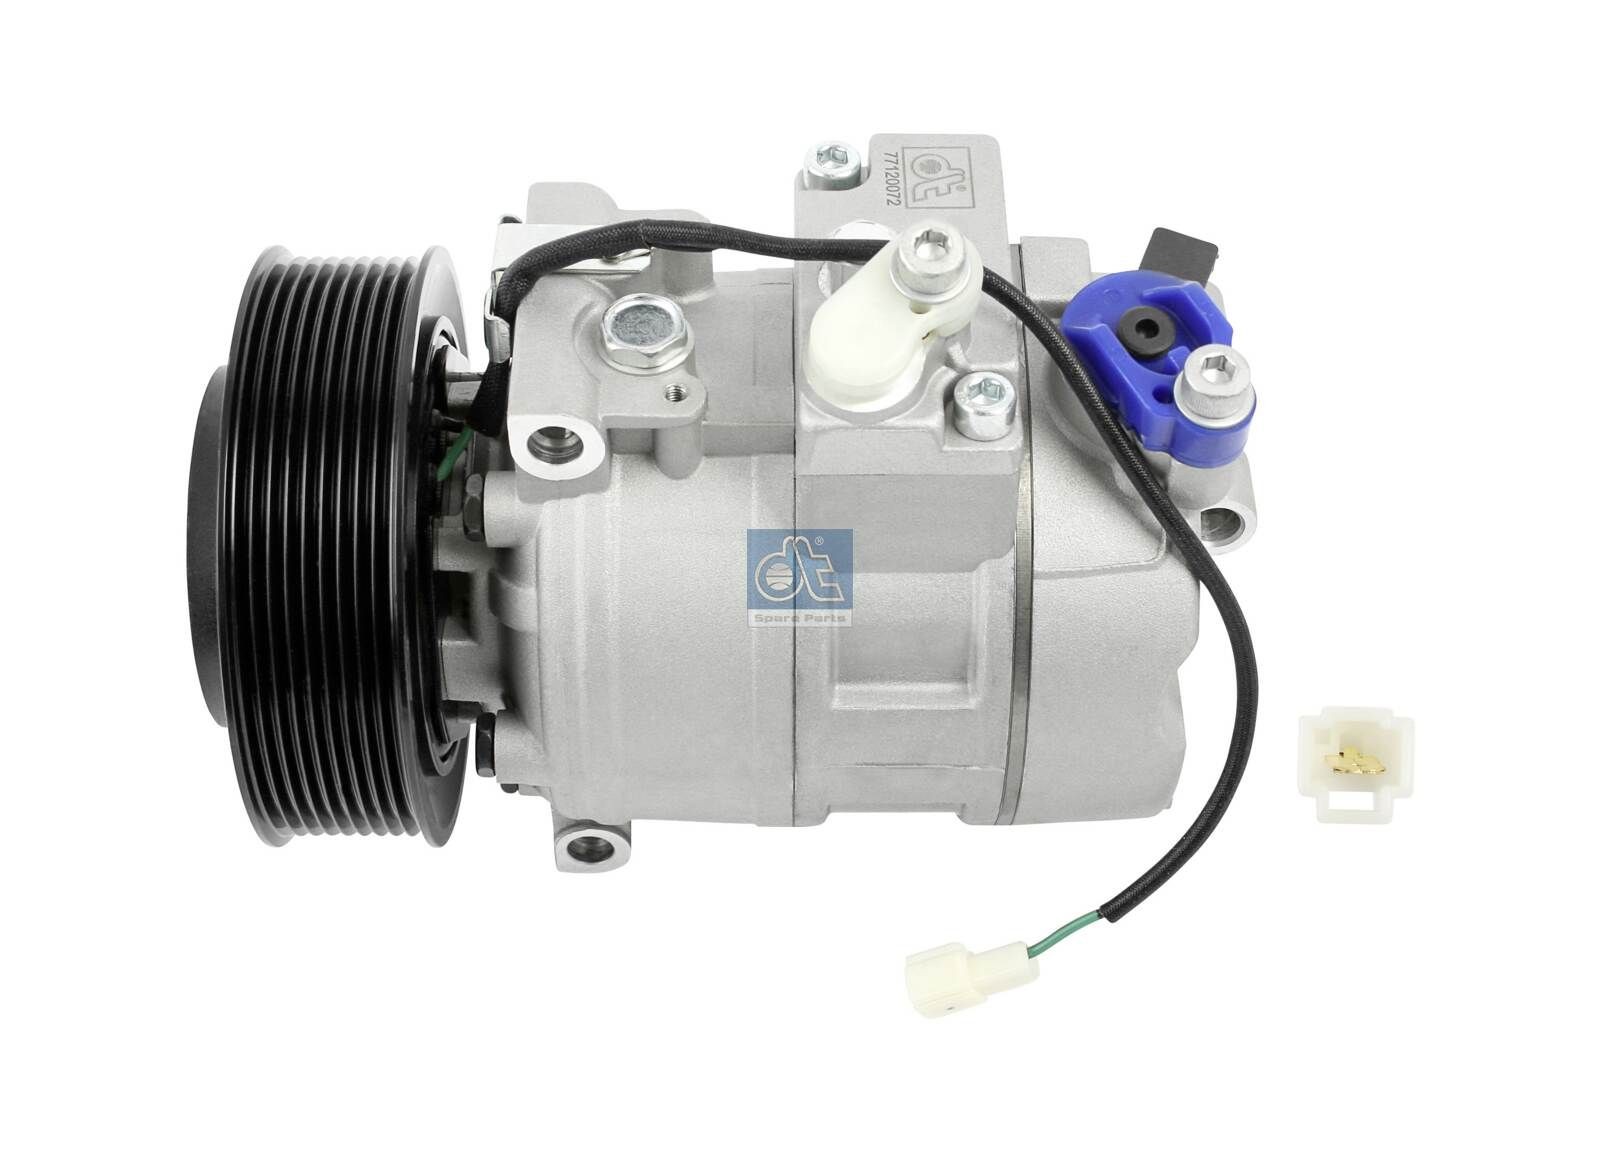 Mercedes C-Class Air conditioning pump 7336841 DT Spare Parts 4.64501 online buy